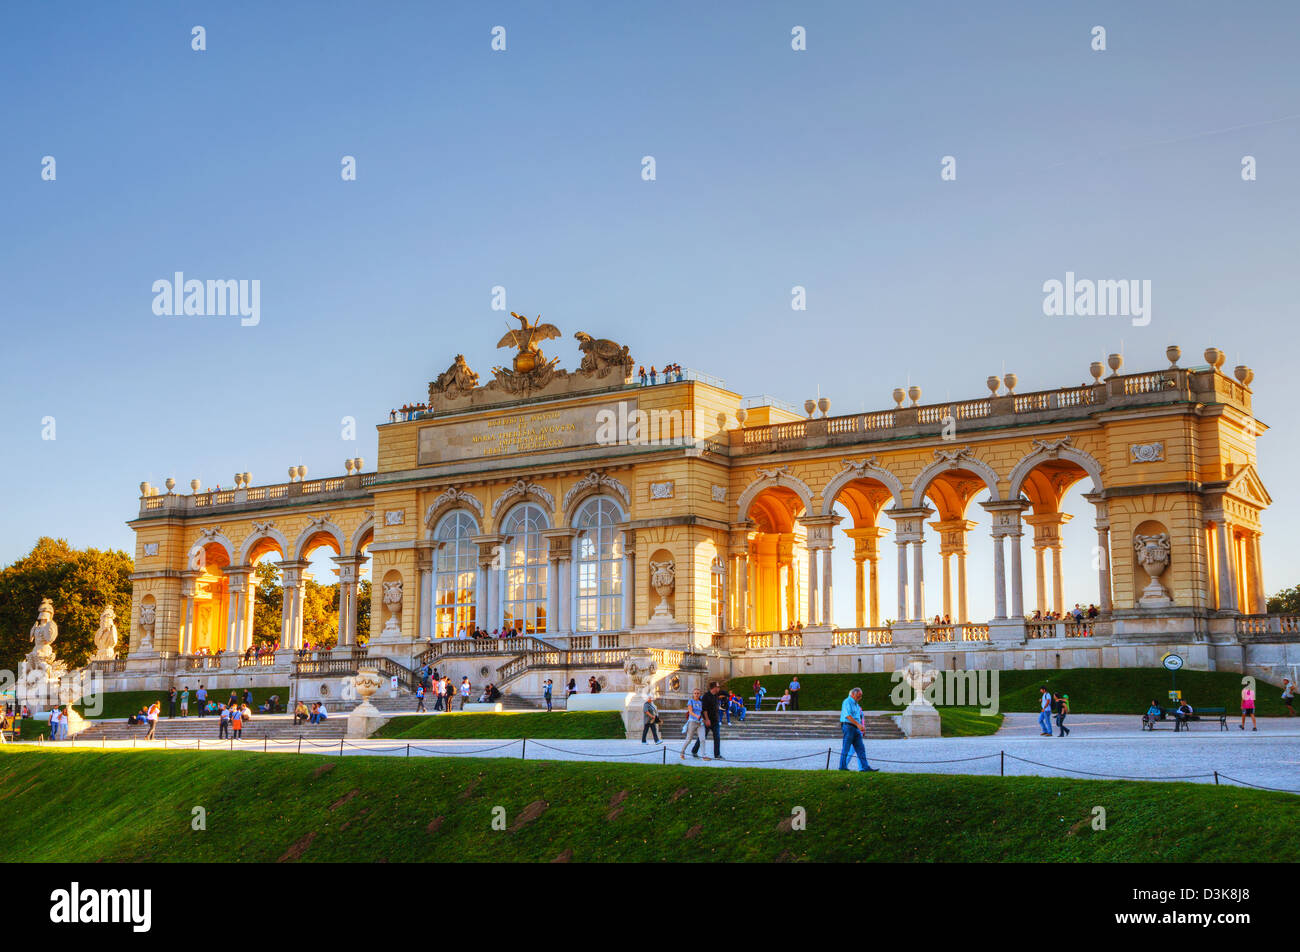 Gloriette Schonbrunn at sunset in Vienna. It's the largest and most well-known gloriette in Vienna. Stock Photo